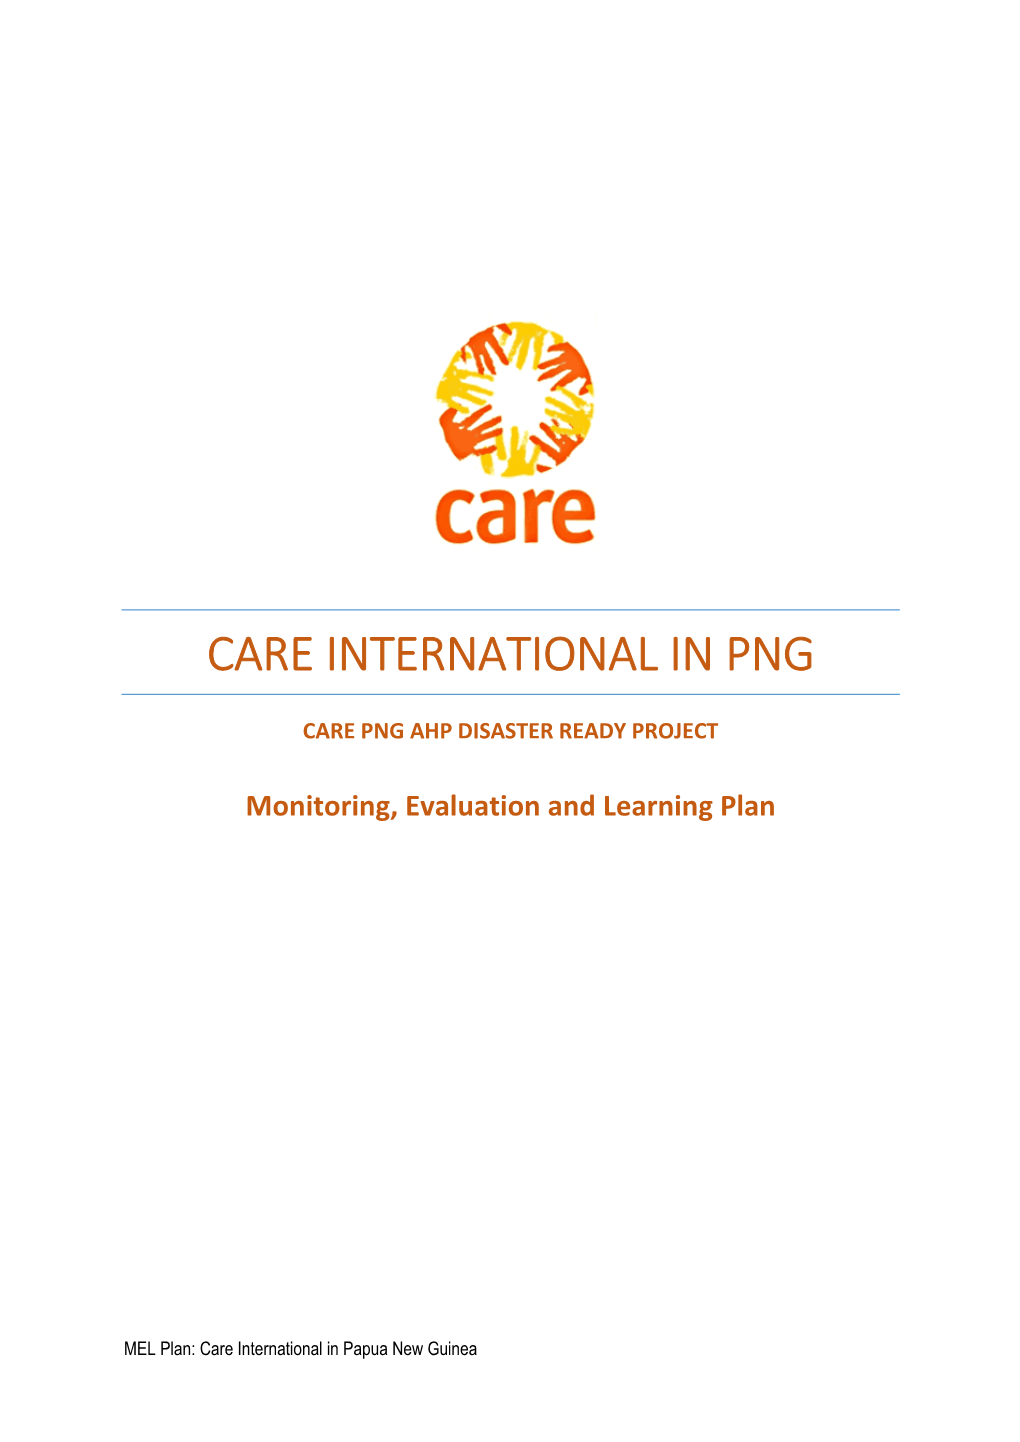 Care International in Png